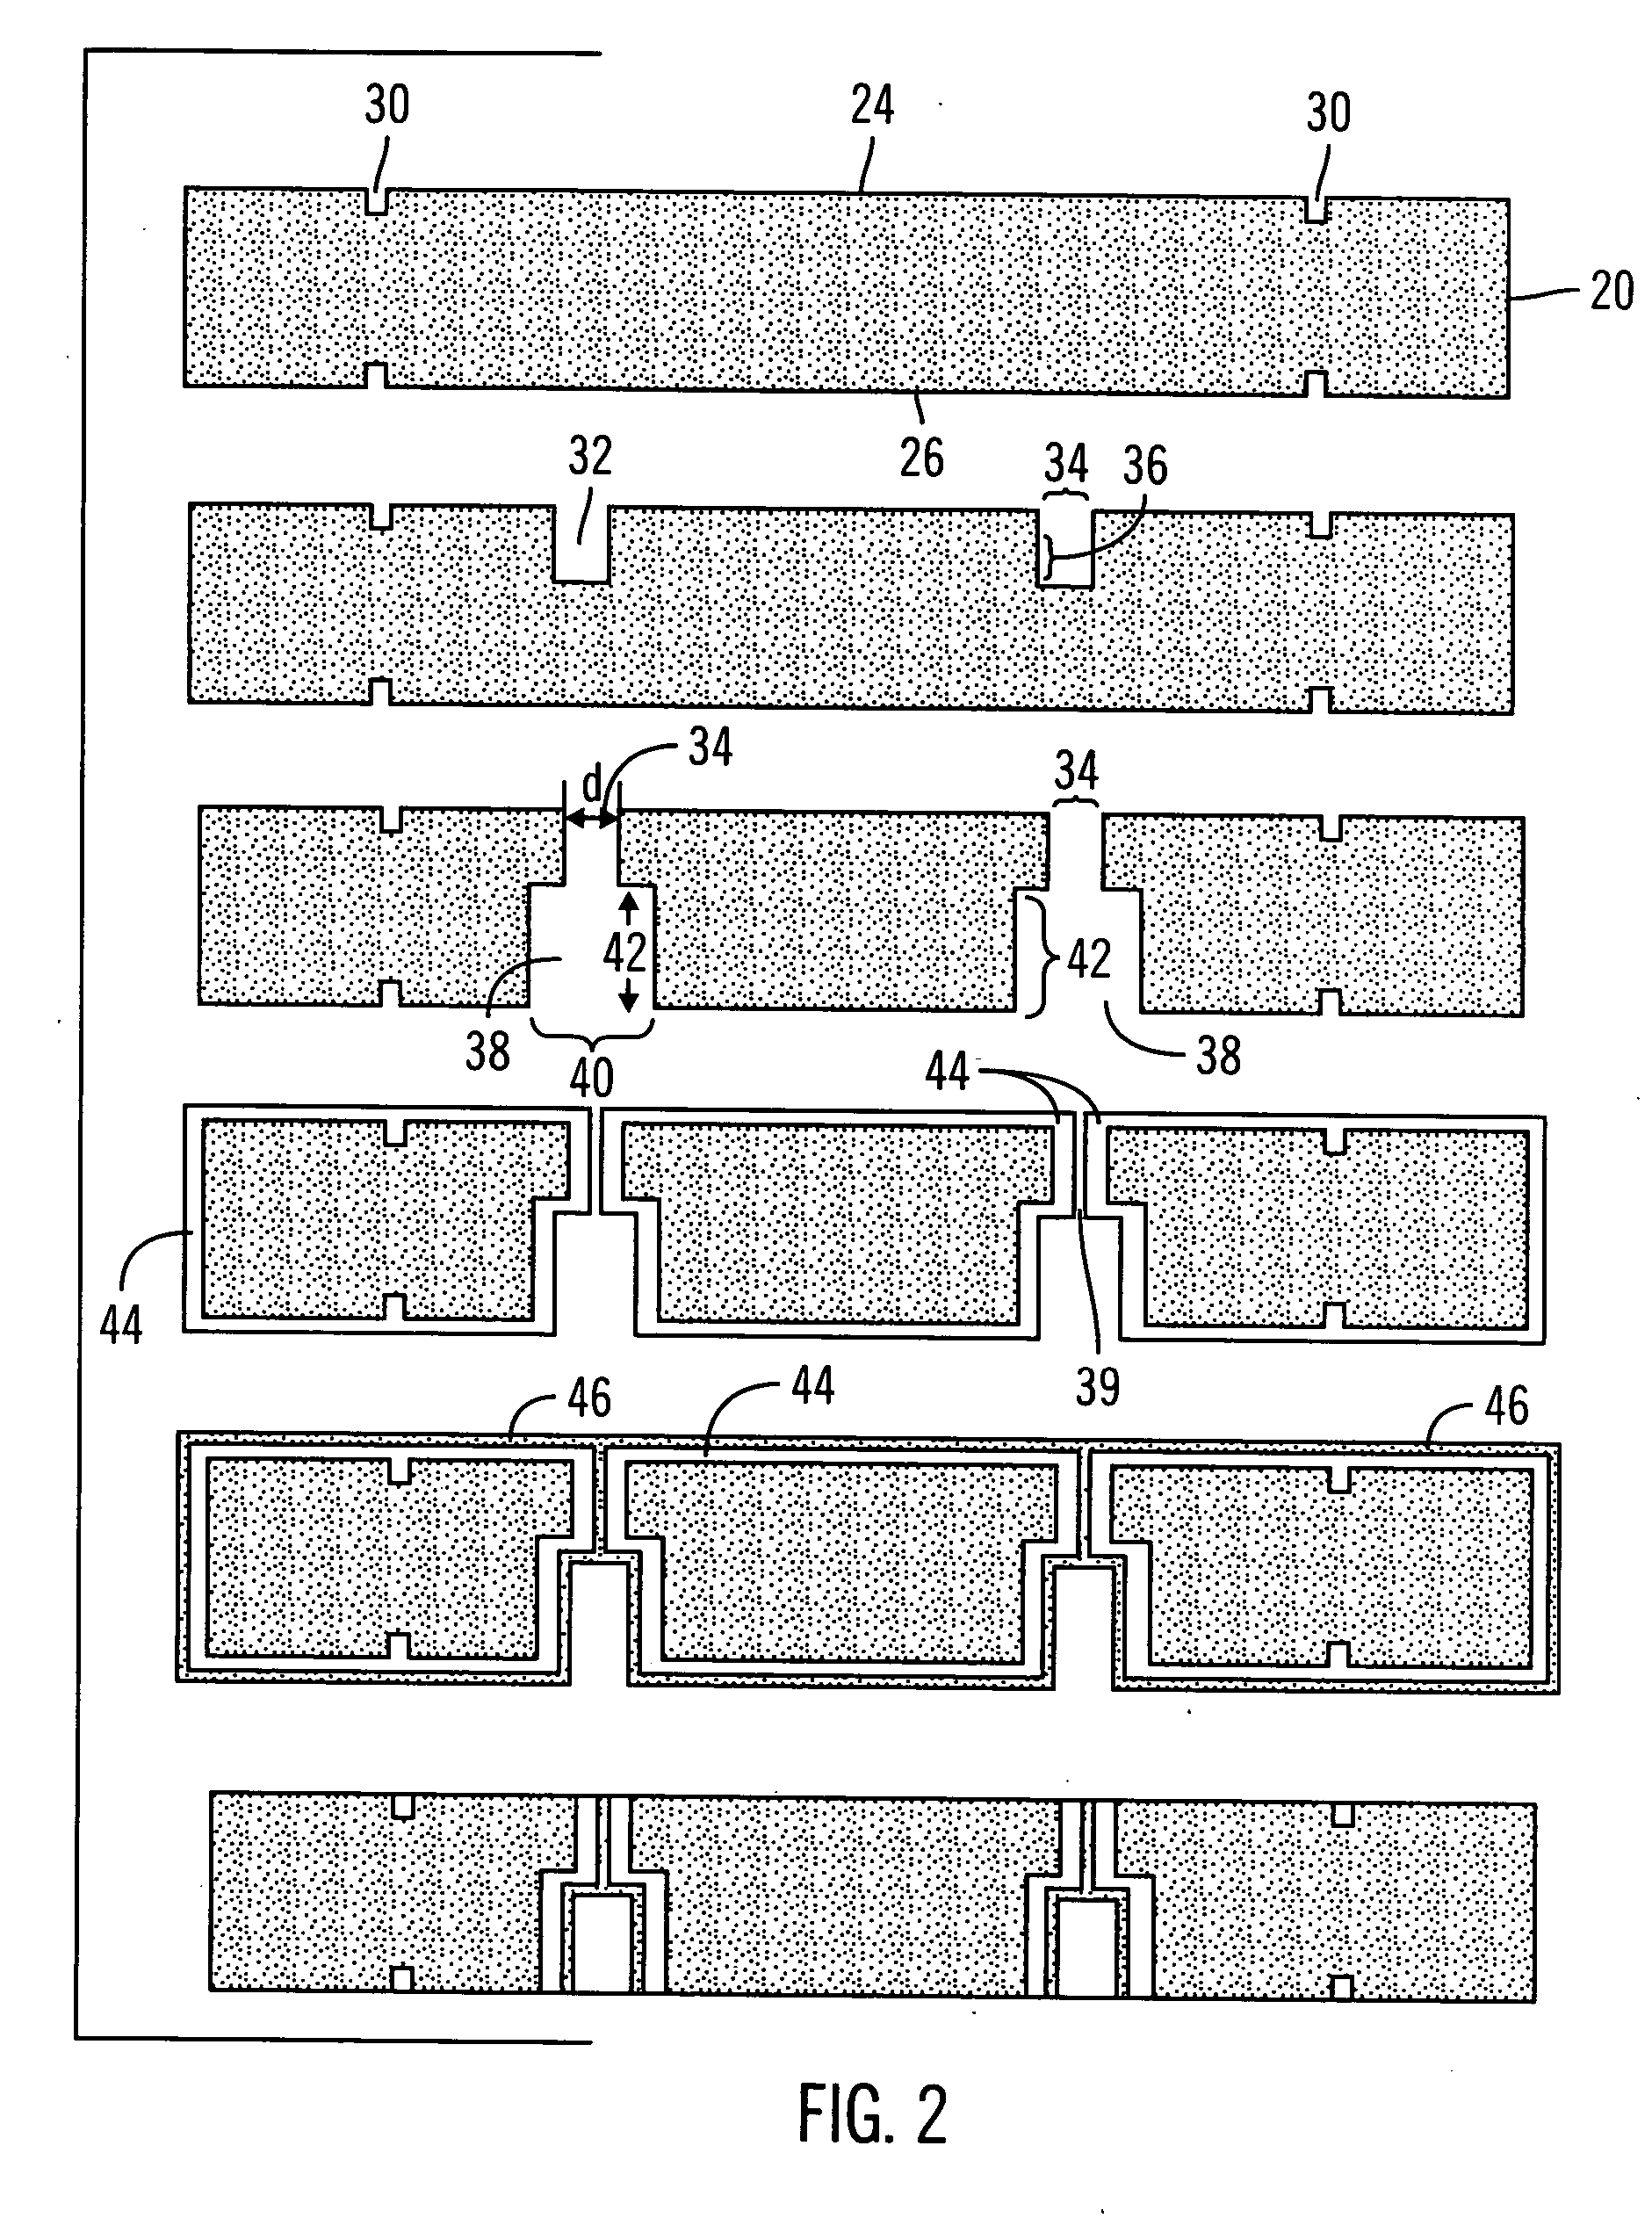 Low temperature method for fabricating high-aspect ratio vias and devices fabricated by said method